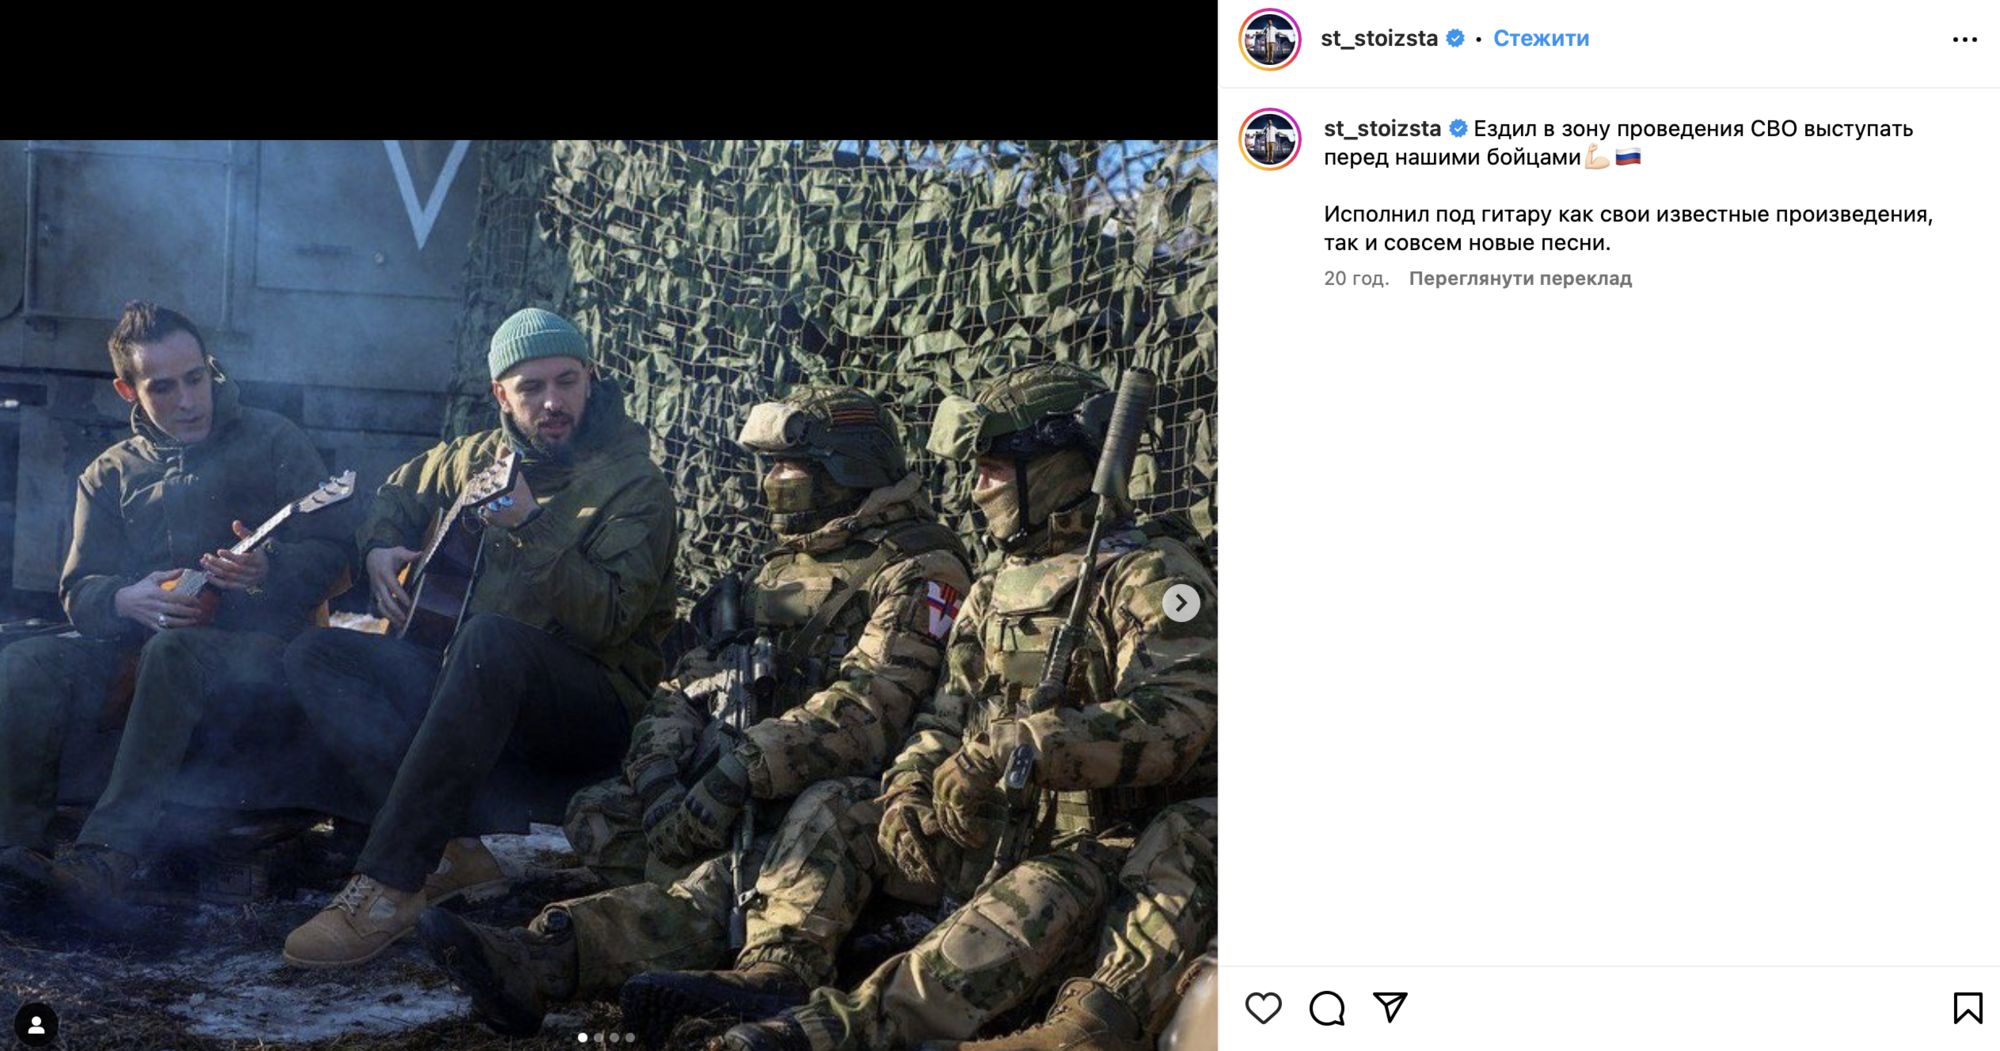 ''How does it feel to sing on the bones?'' A famous Russian rapper gave a concert for the occupiers in Donbas and was hated